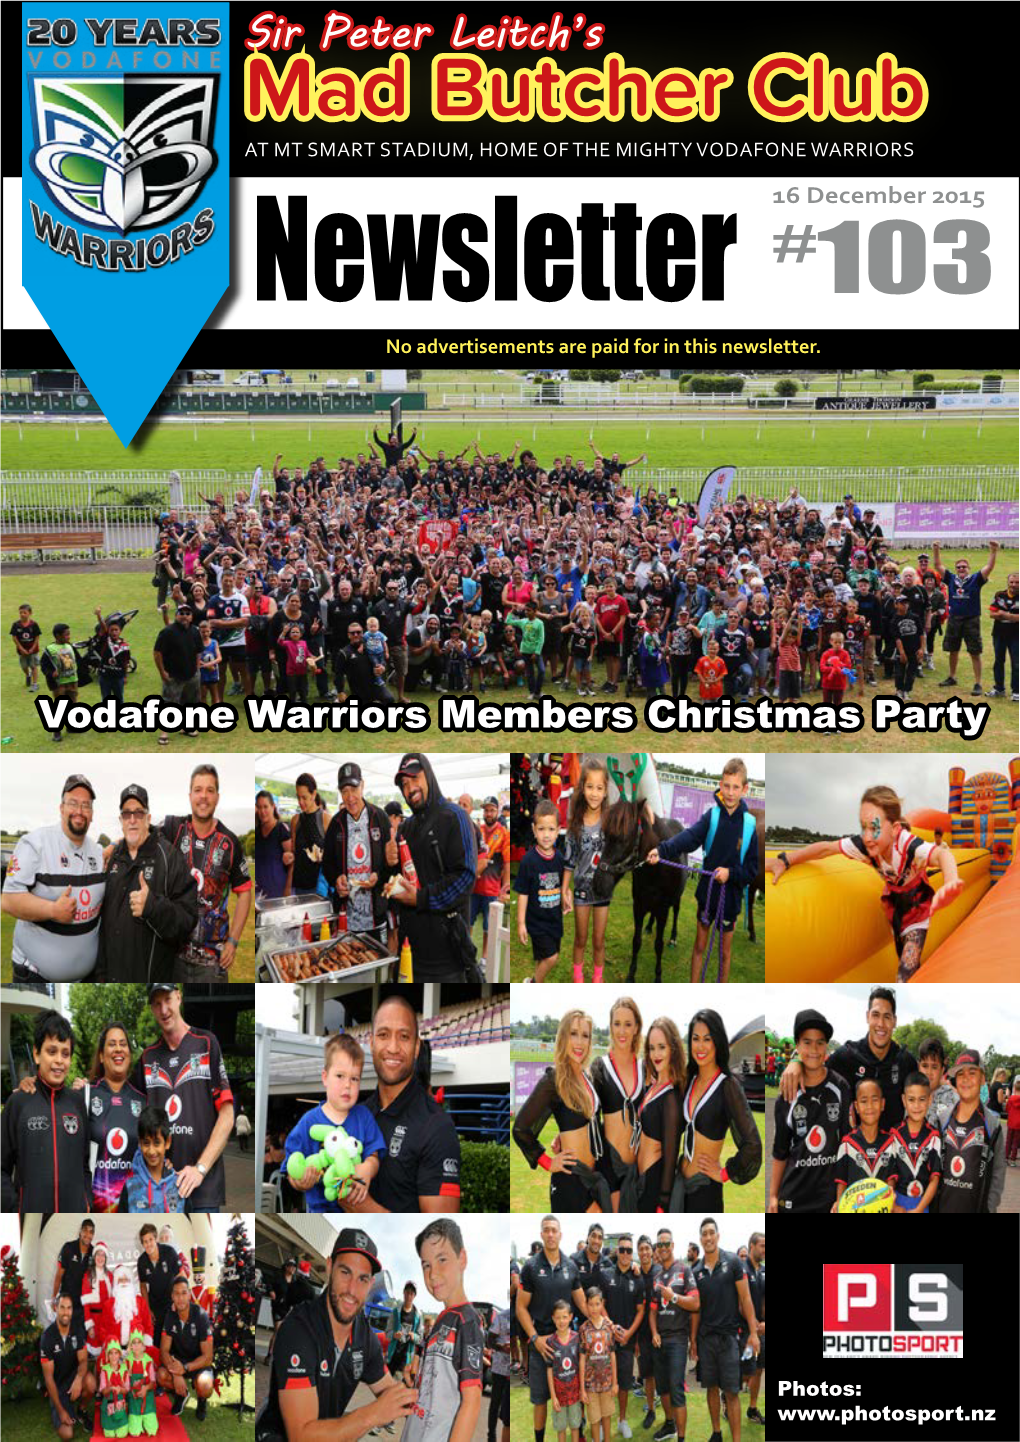 Mad Butcher Club at MT SMART STADIUM, HOME of the MIGHTY VODAFONE WARRIORS 16 December 2015 Newsletter #103 No Advertisements Are Paid for in This Newsletter